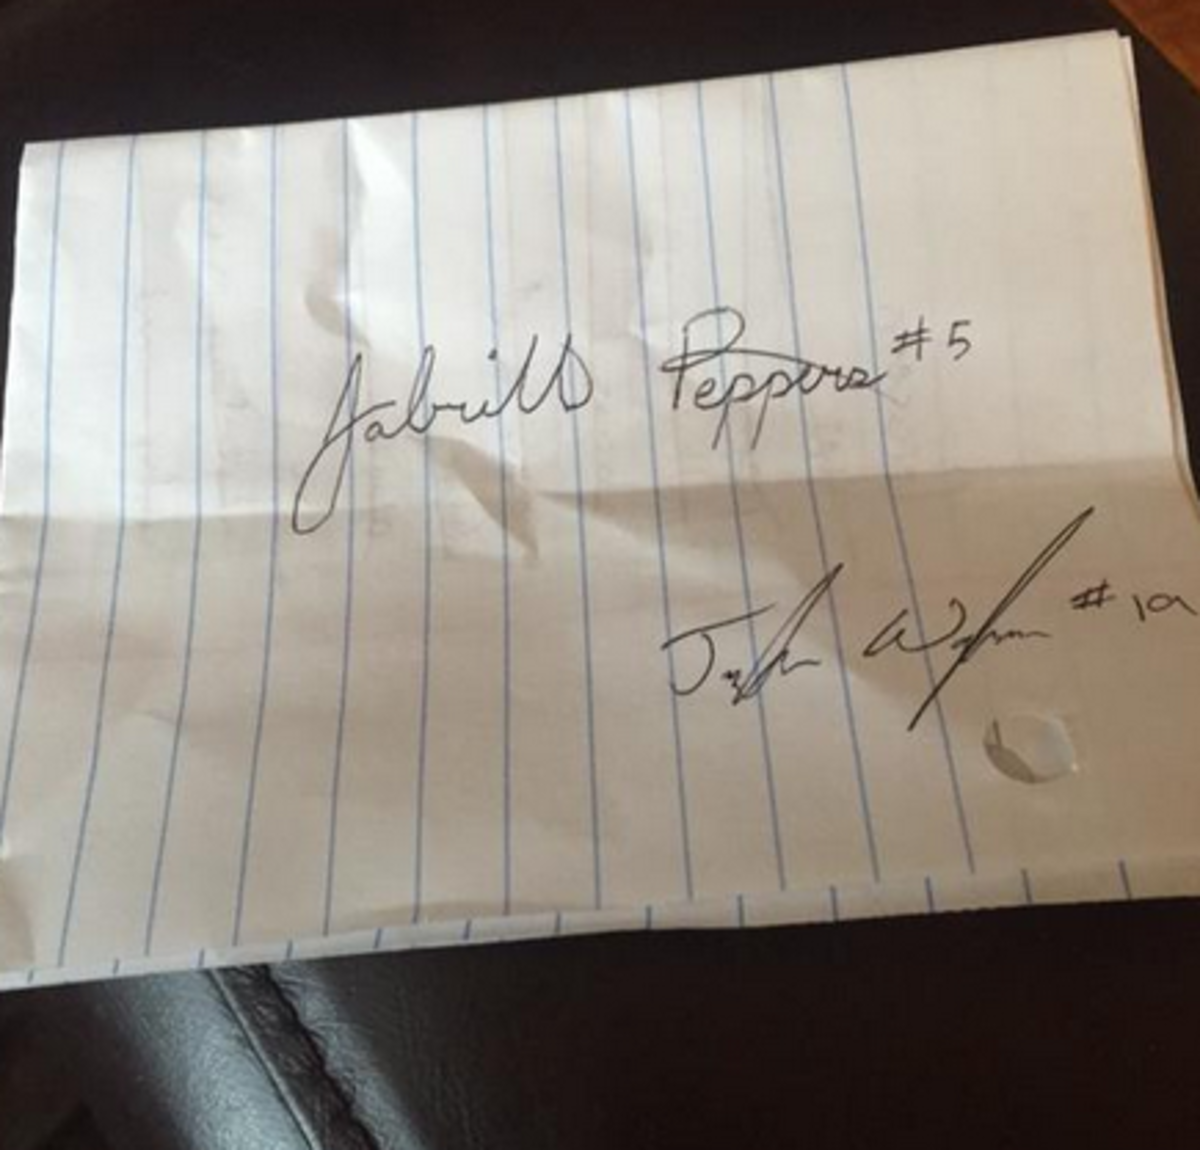 Jabrill Peppers Autographs a piece of paper.